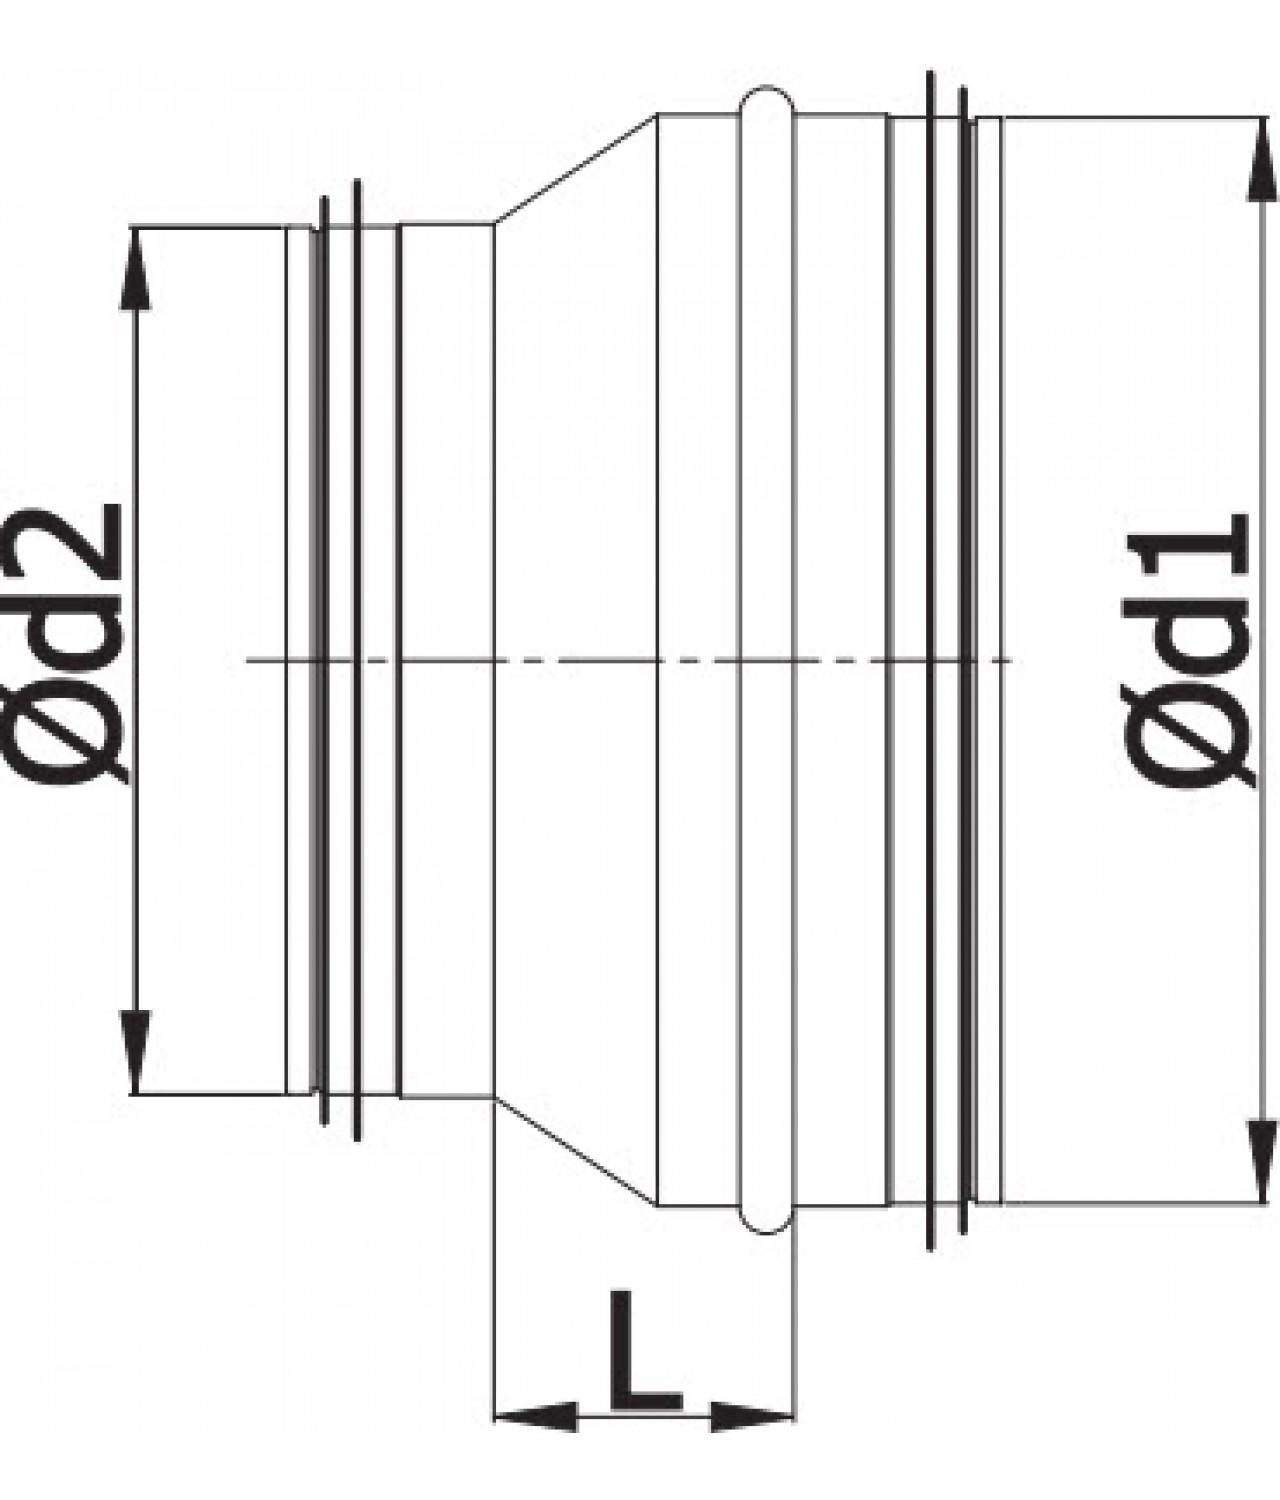 Symmetrical reducers for ducts RG - drawing